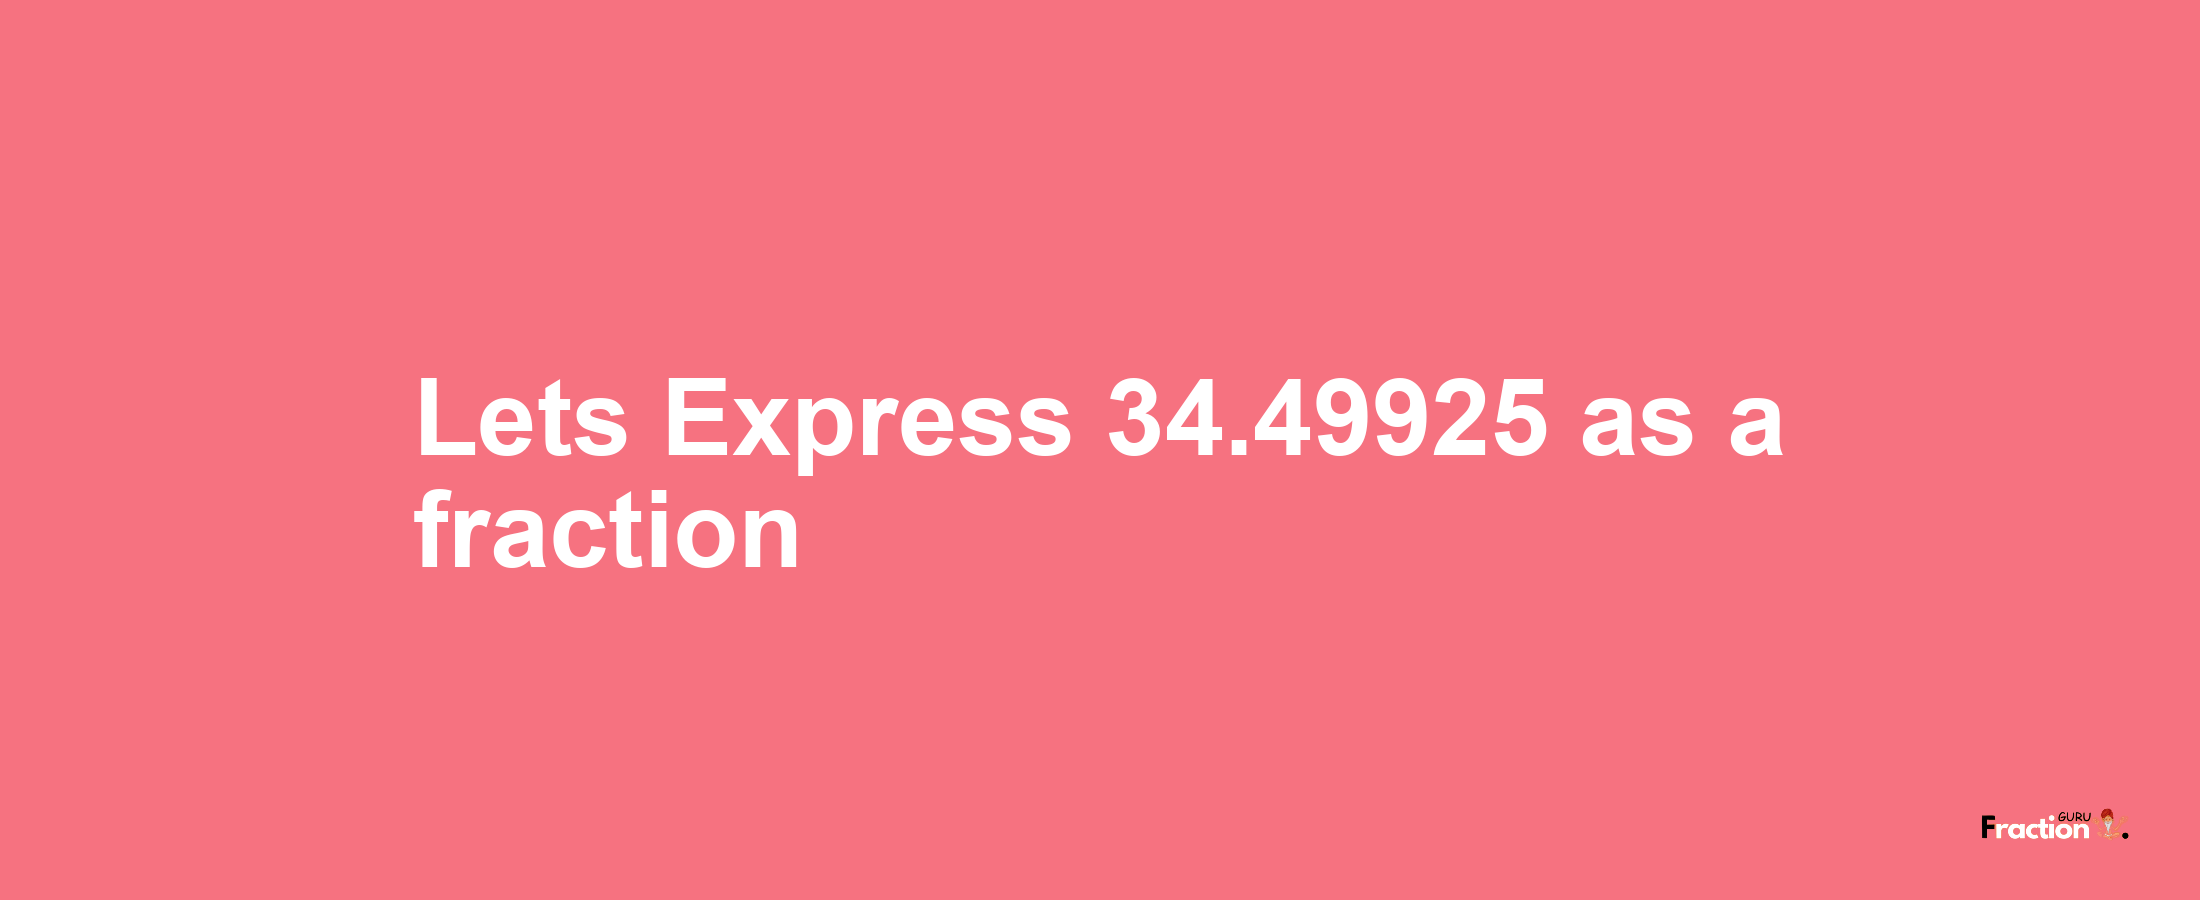 Lets Express 34.49925 as afraction